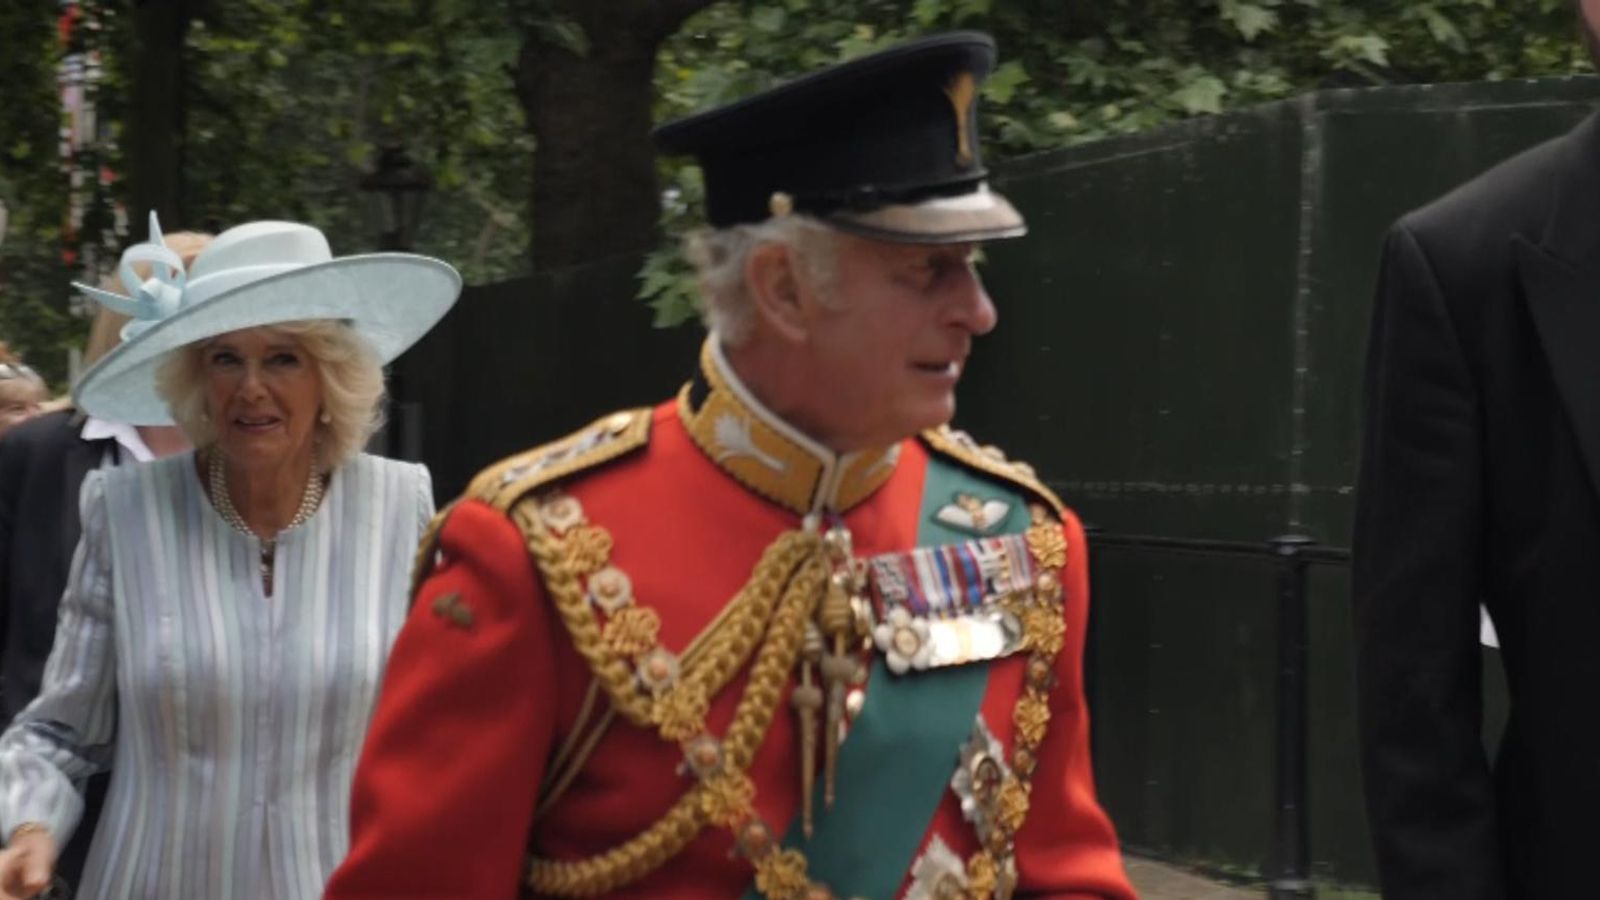 Prince Charles reacts to summer weather during Platinum Jubilee